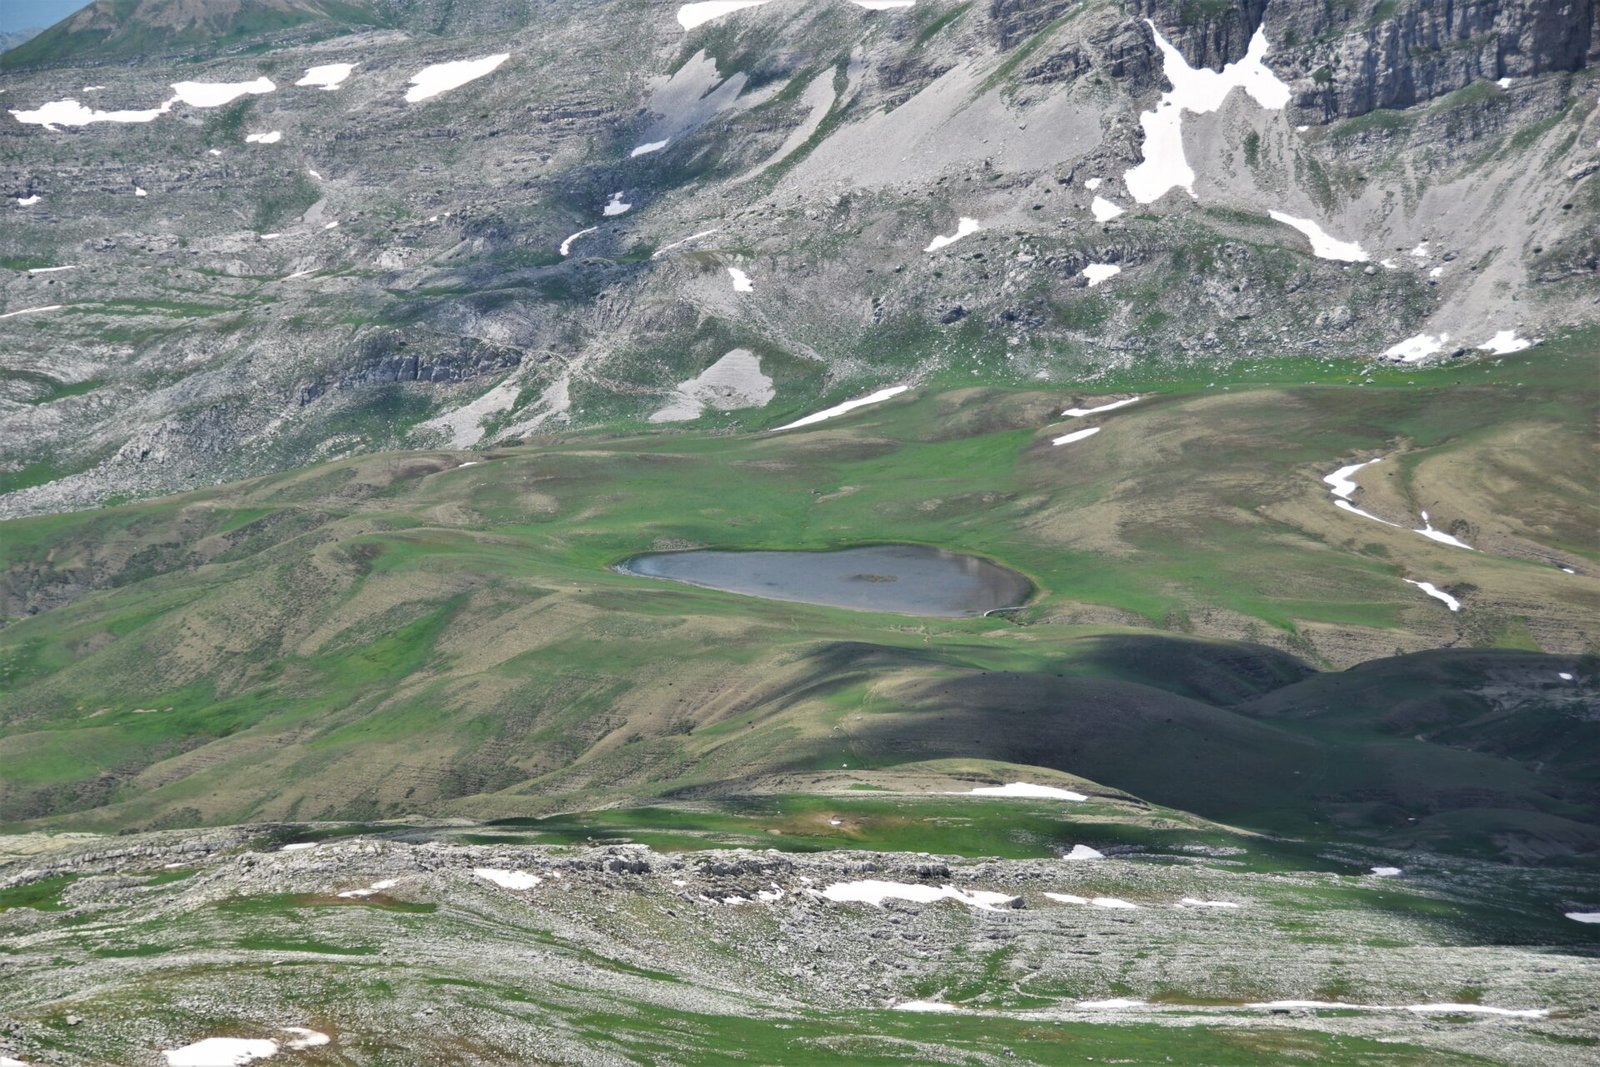 an alpine lake surrounded by green pastures in a rugged mountain landscape